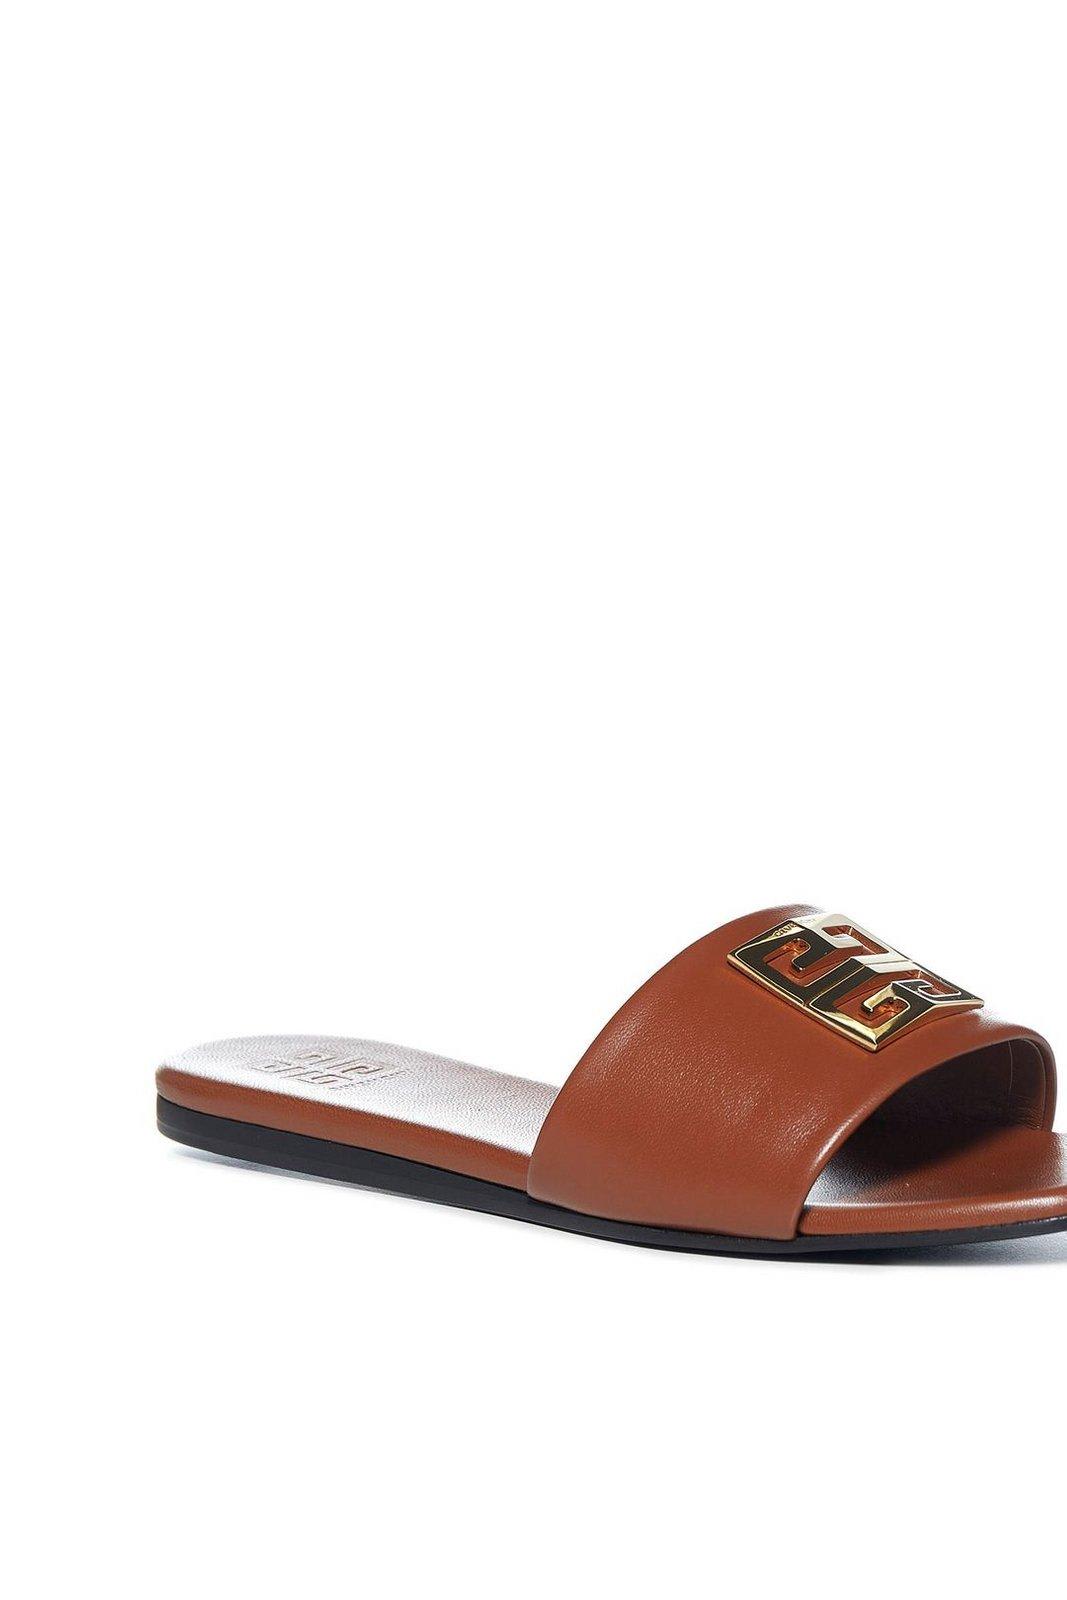 Shop Givenchy 4g Motif Flat Sandals In Brown